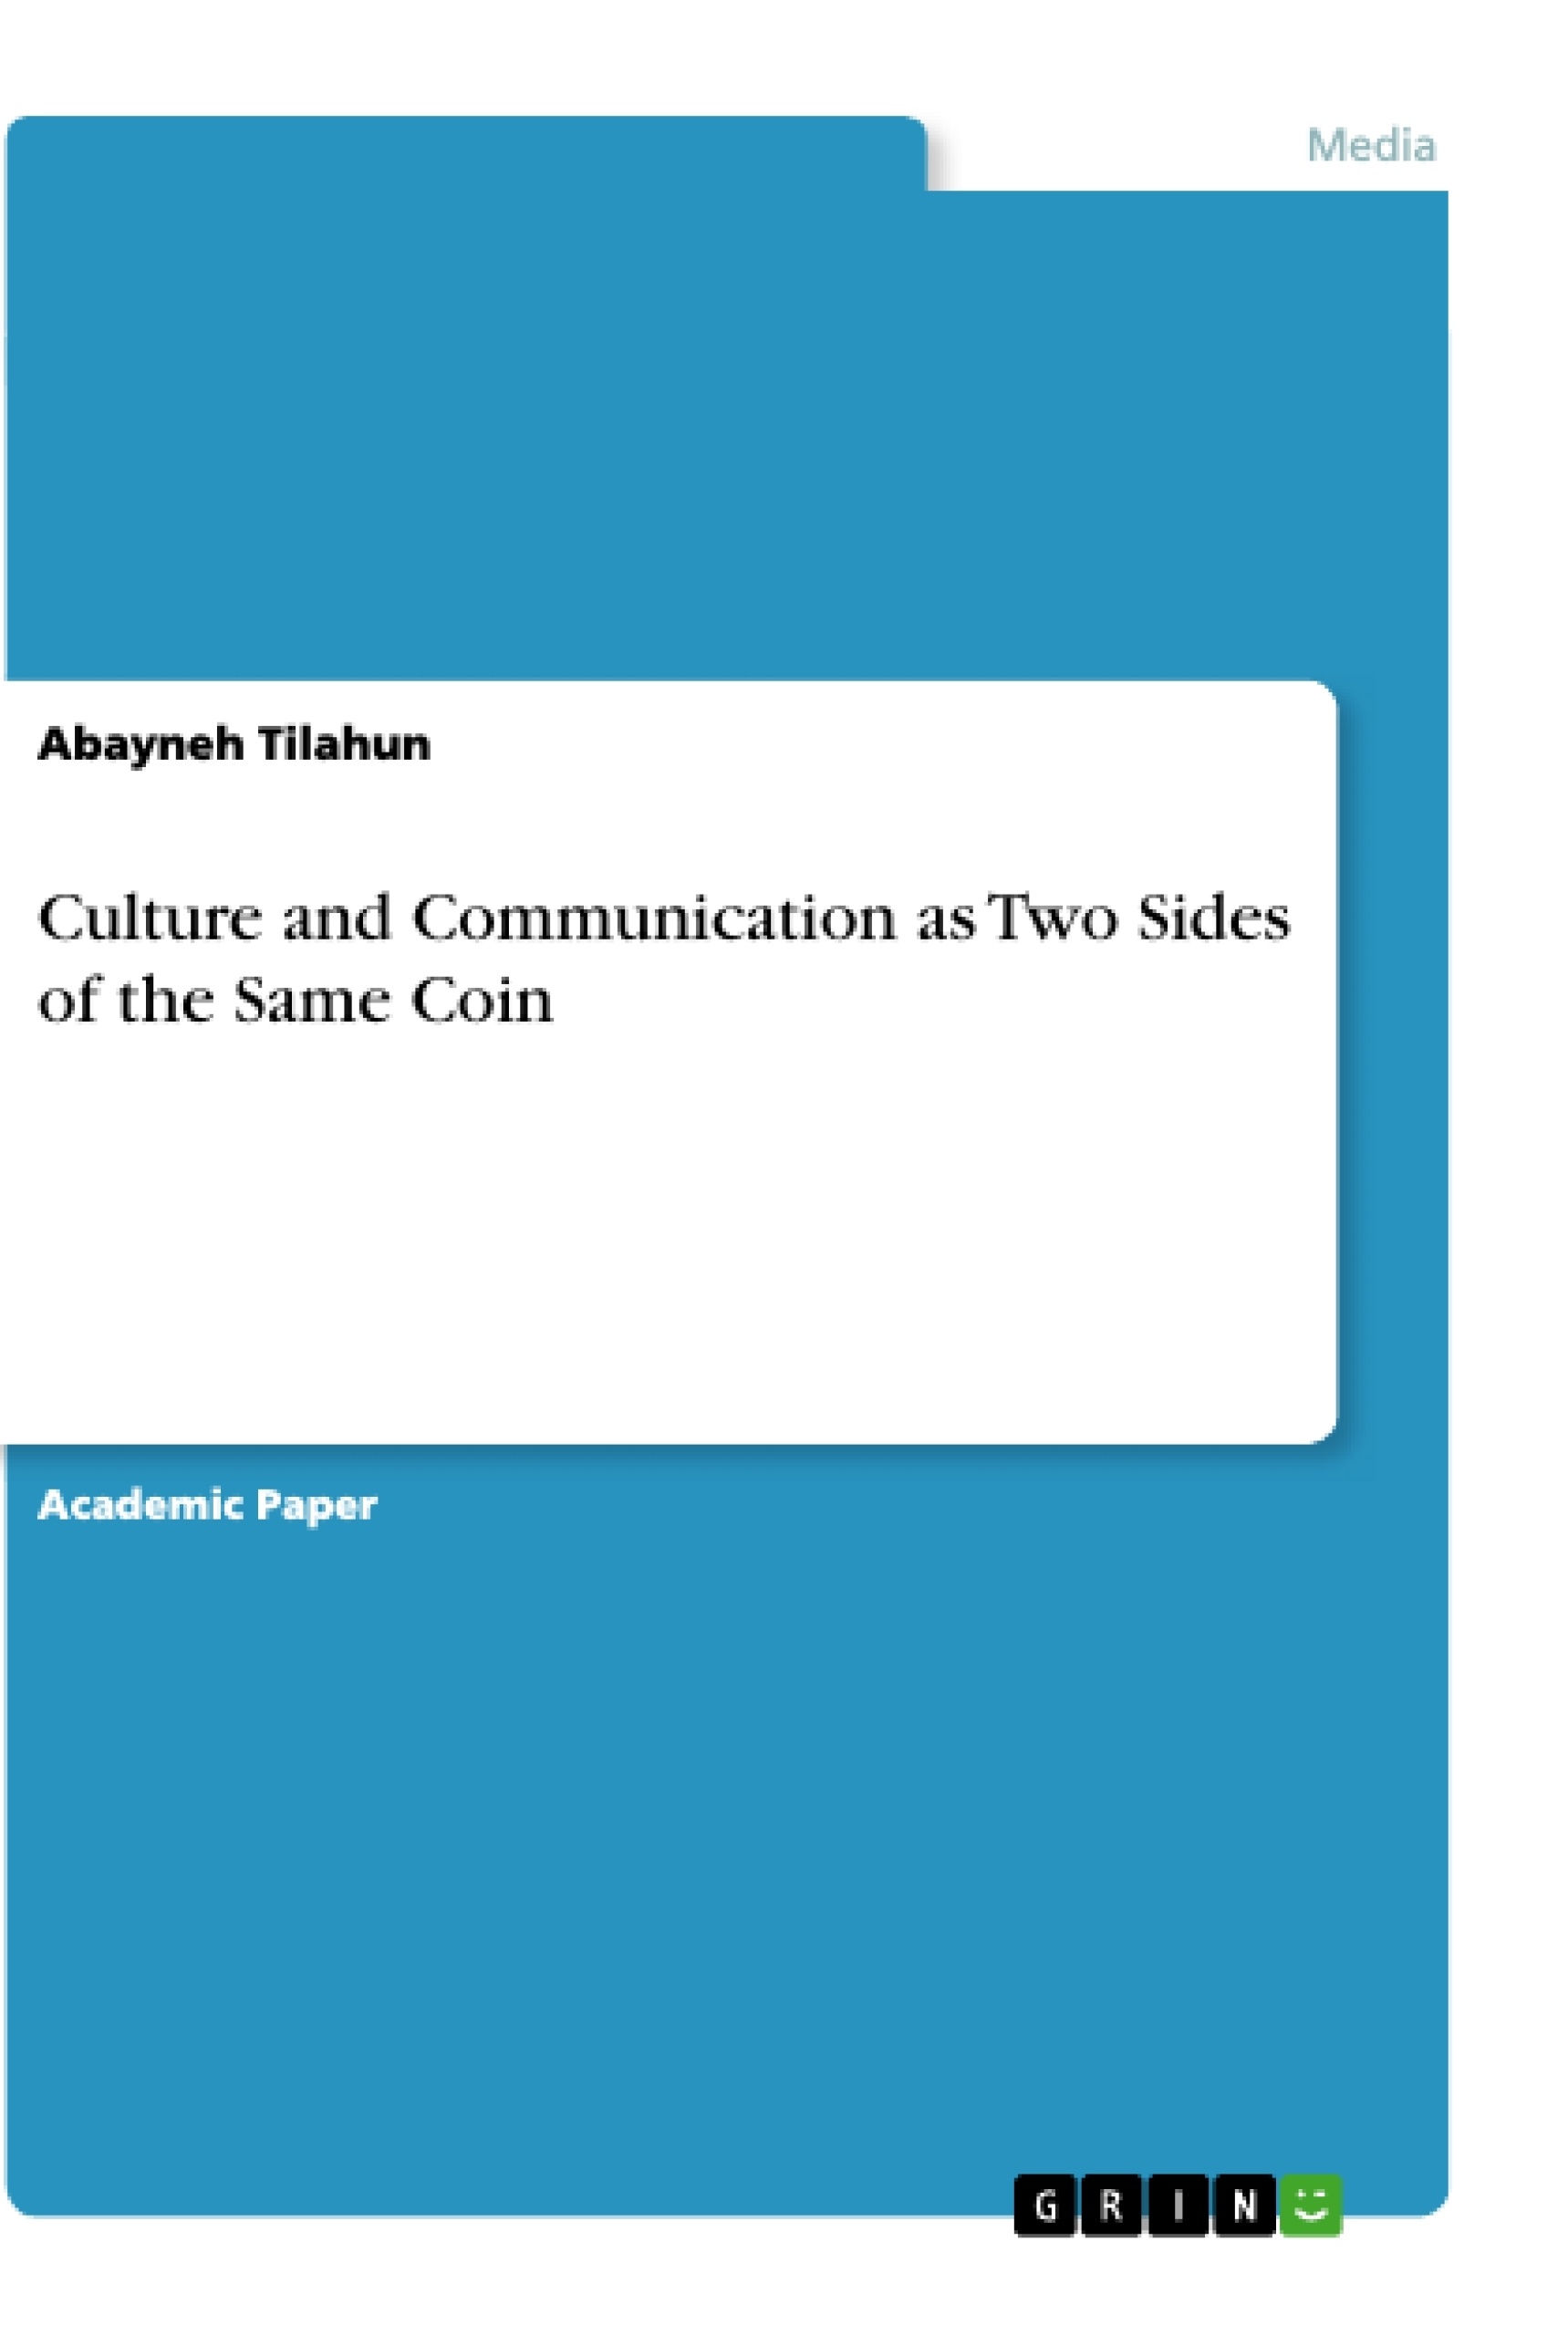 Title: Culture and Communication as Two Sides of the Same Coin